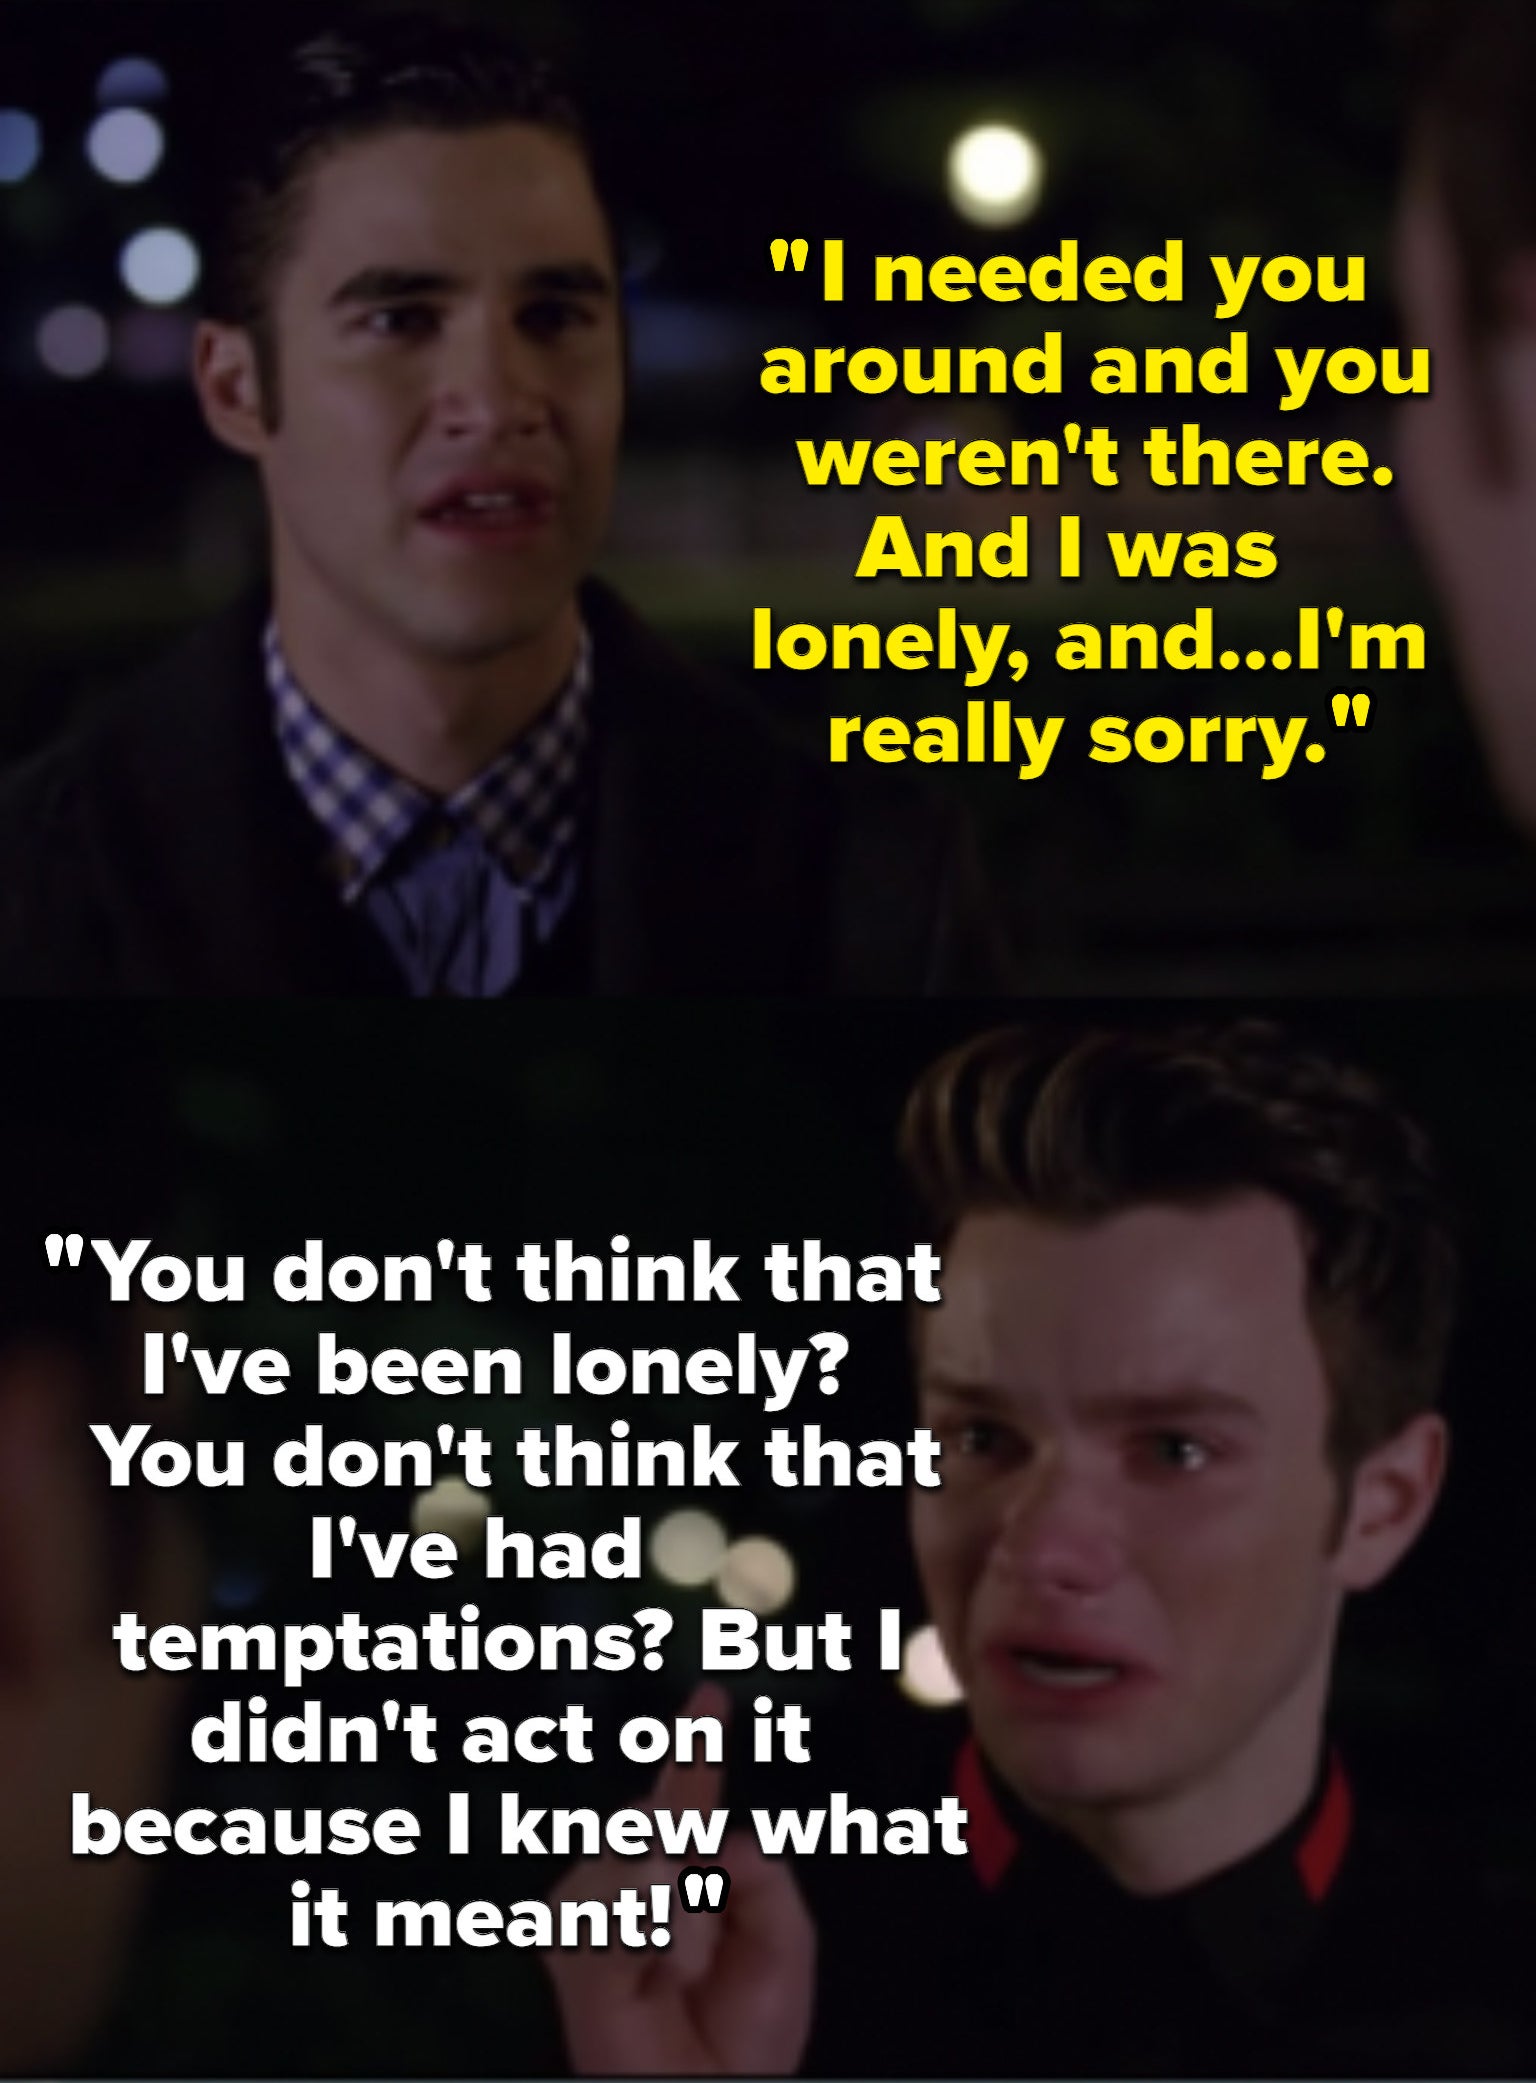 Blaine: &quot;I needed you and you weren&#x27;t there. And I was lonely, and...I&#x27;m really sorry.&quot; Kurt: &quot;You don&#x27;t think that I&#x27;ve been lonely? You don&#x27;t think that I&#x27;ve had temptations? But I didn&#x27;t act on it because I knew what it meant!&quot;